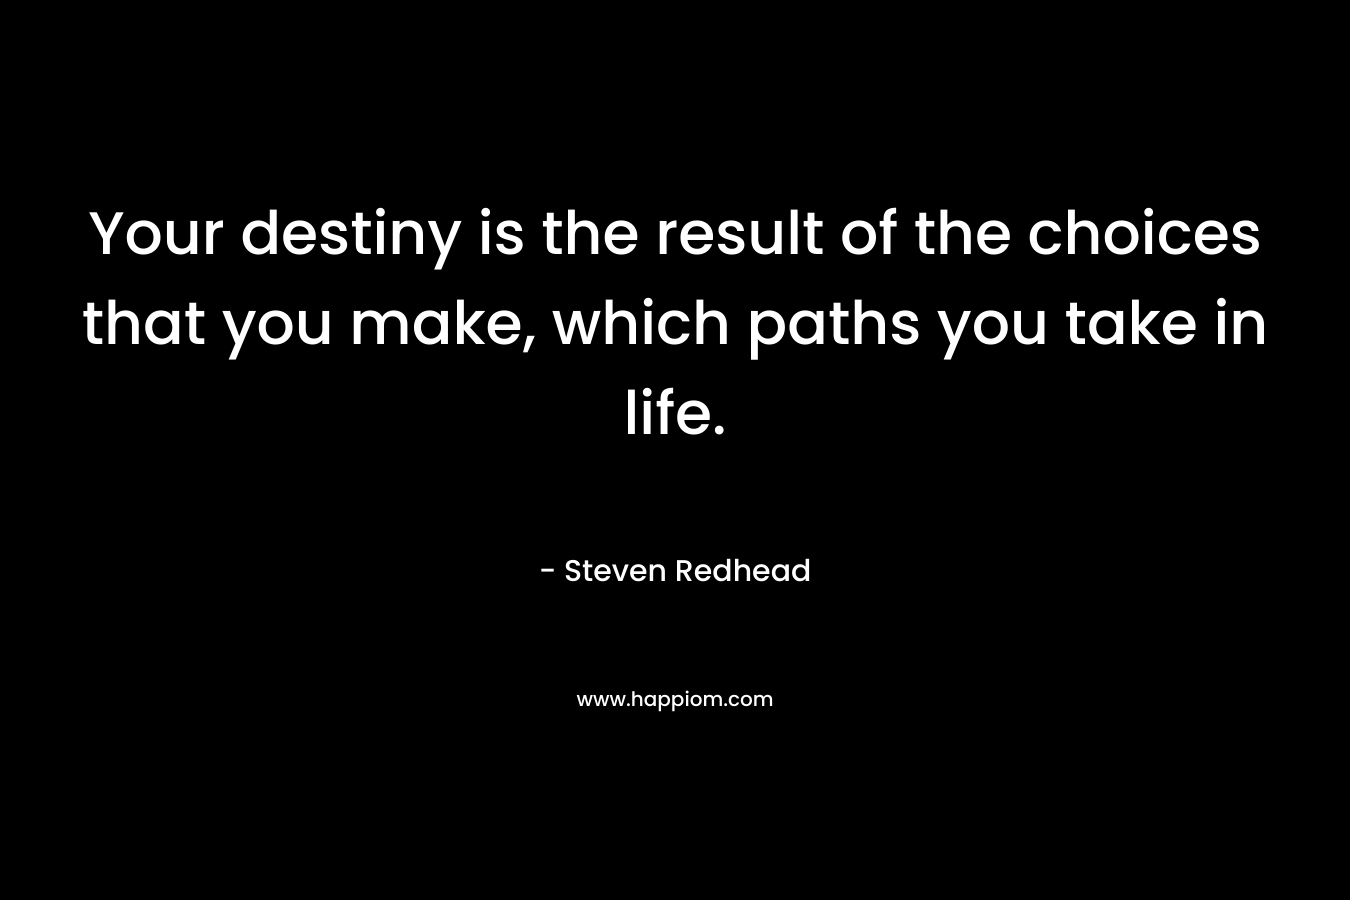 Your destiny is the result of the choices that you make, which paths you take in life.